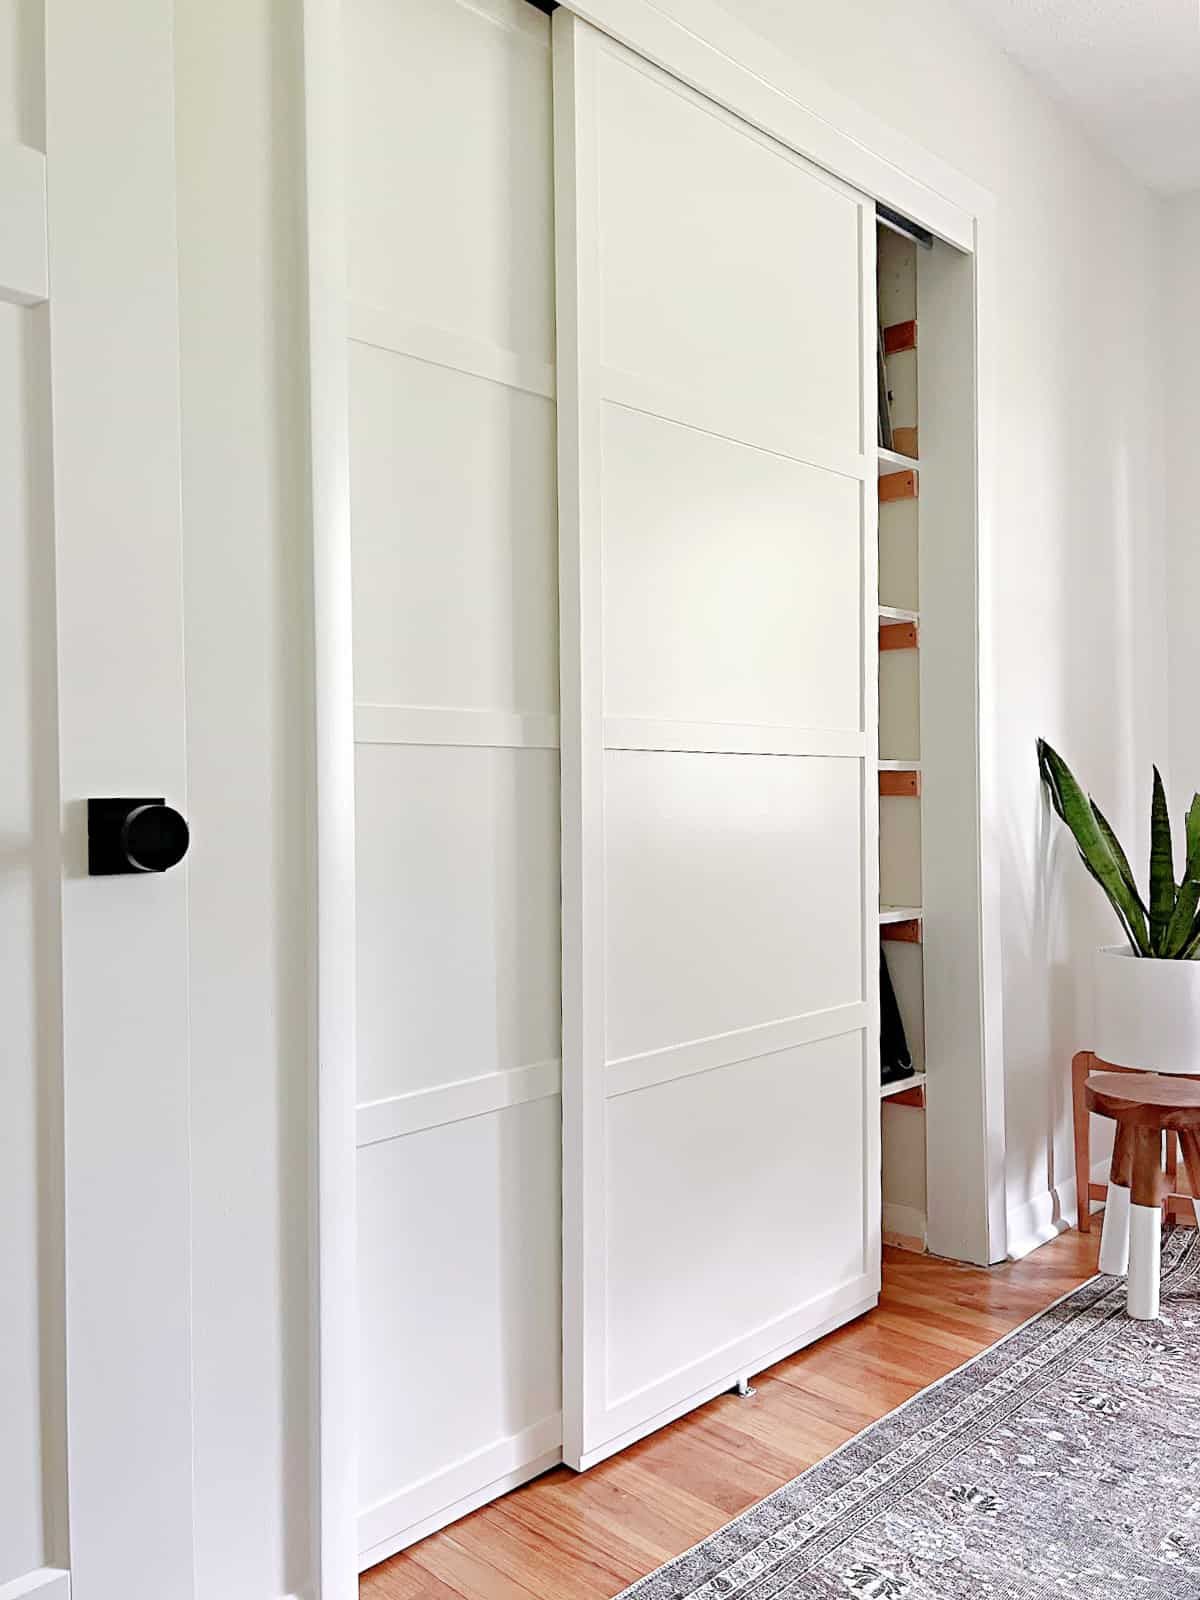 Getting an exotic closet sliding door
into your home